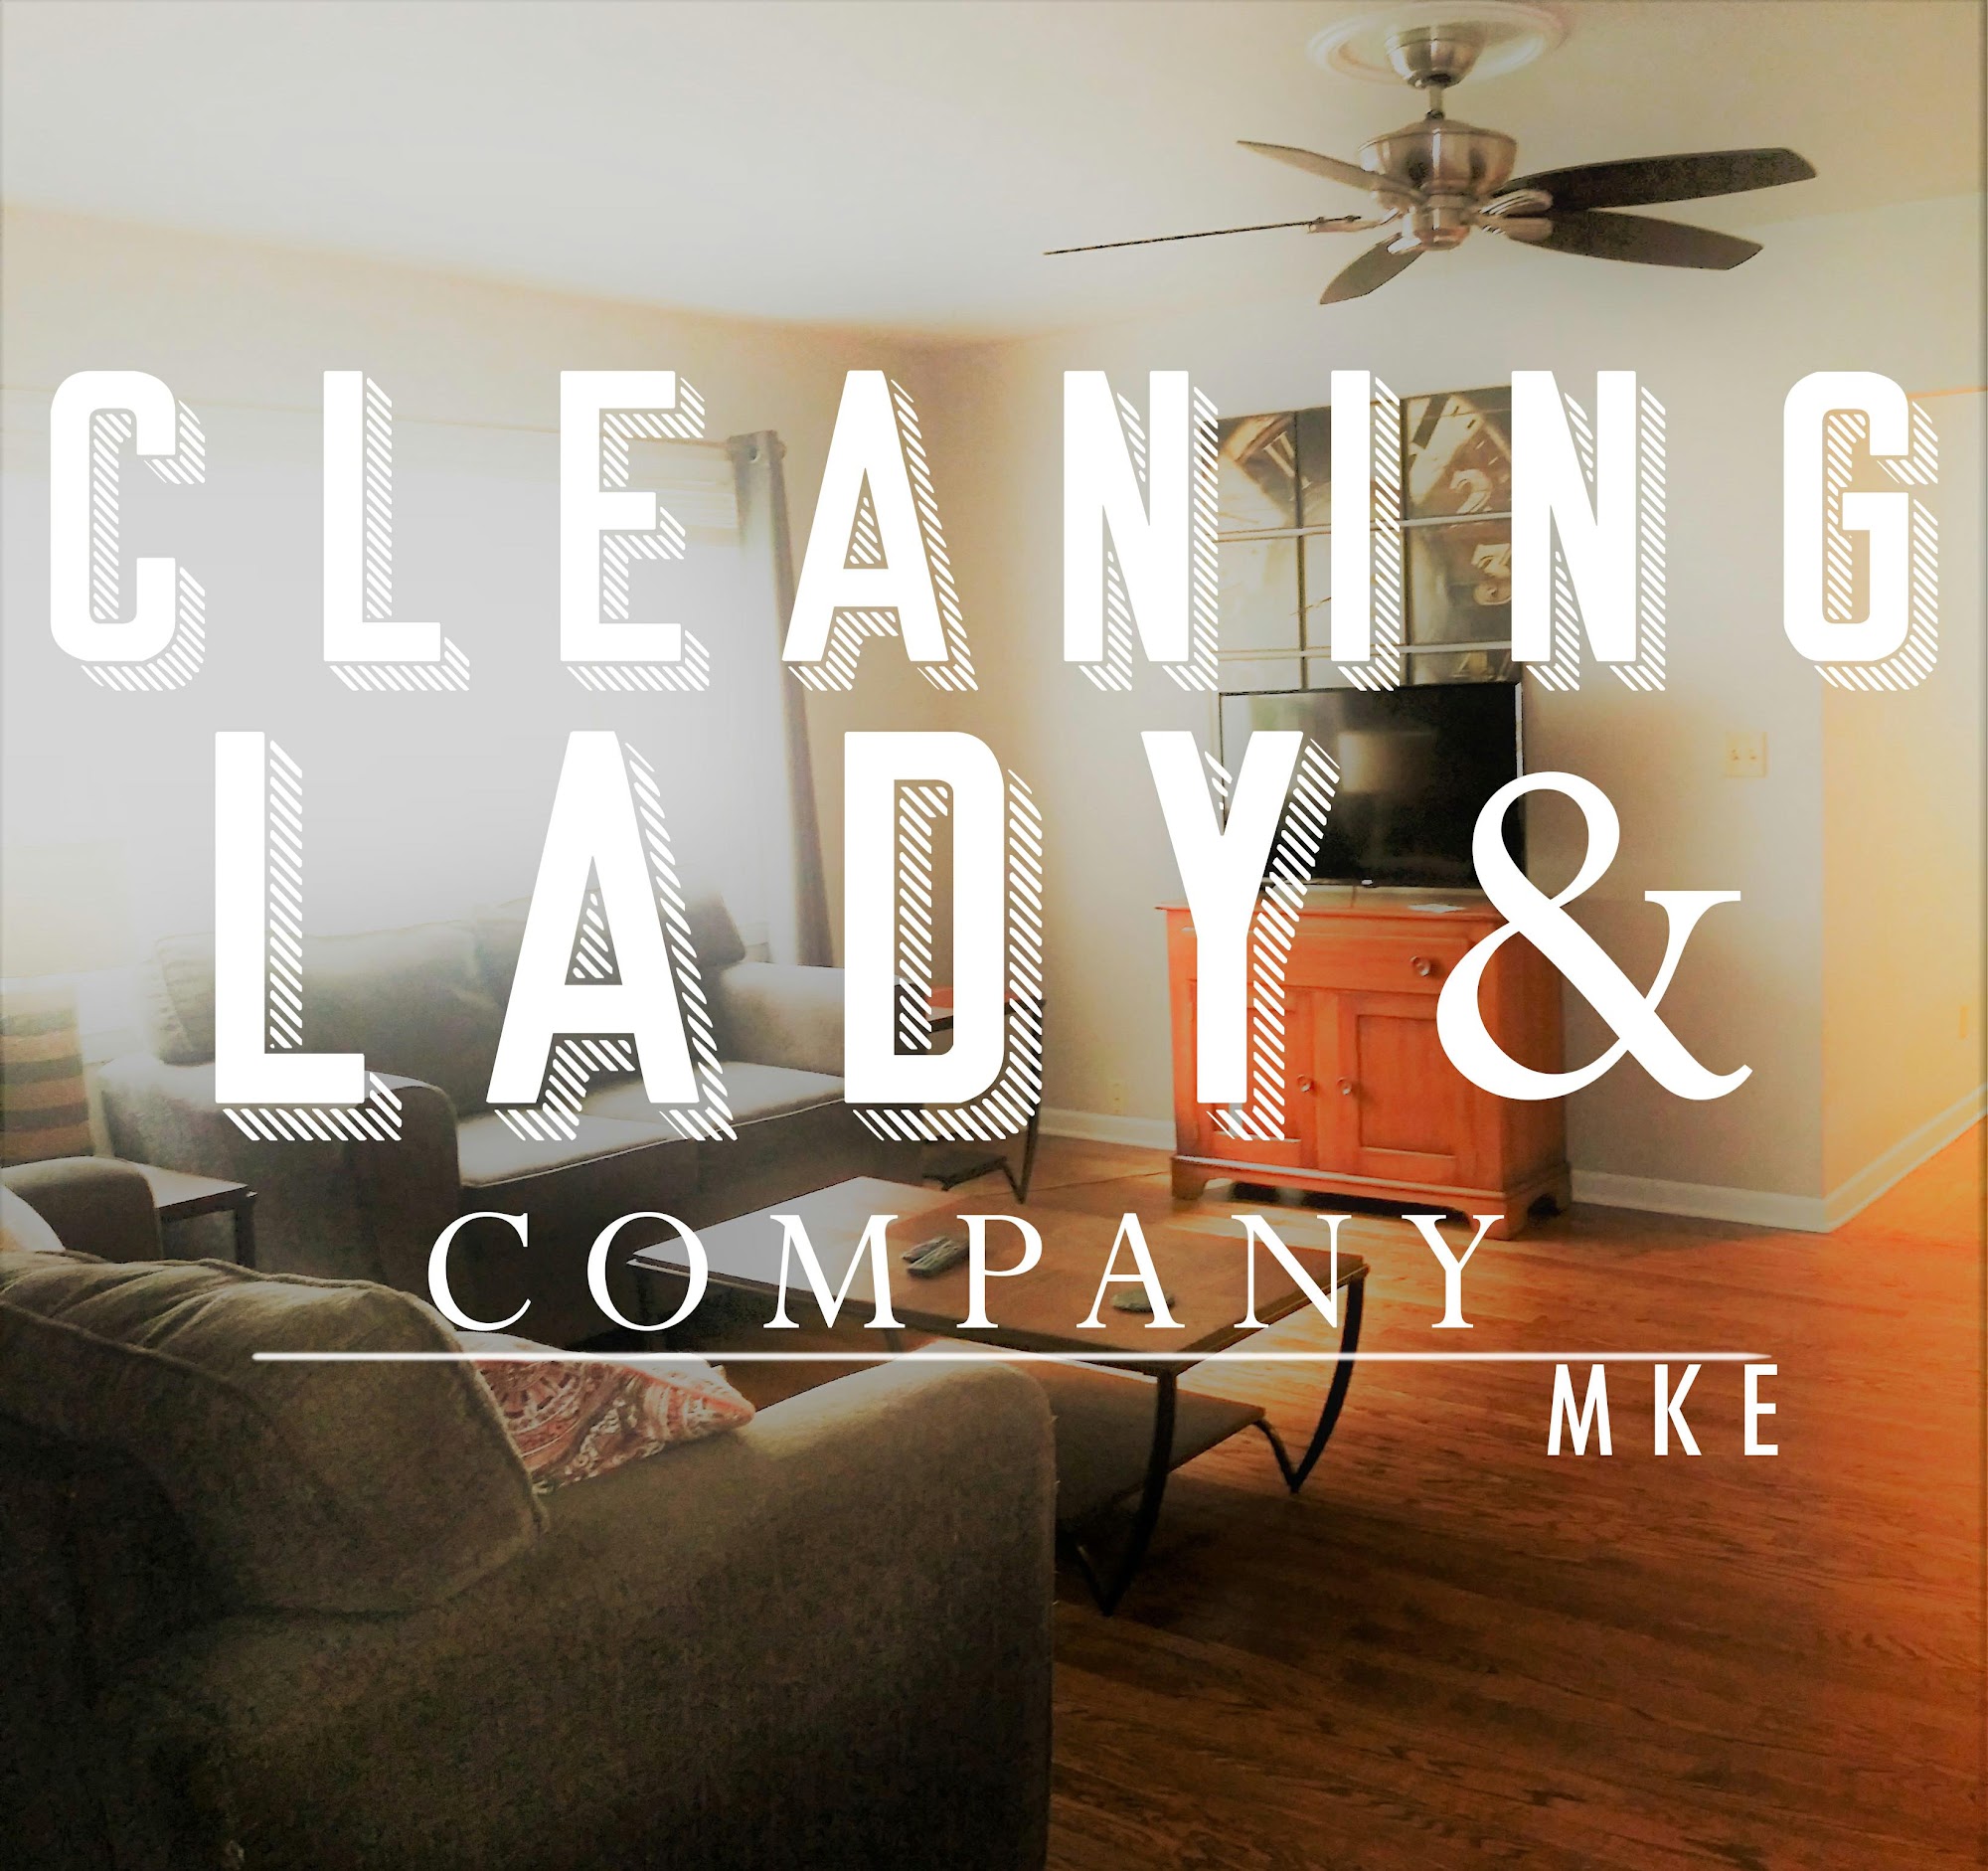 Cleaning lady and company